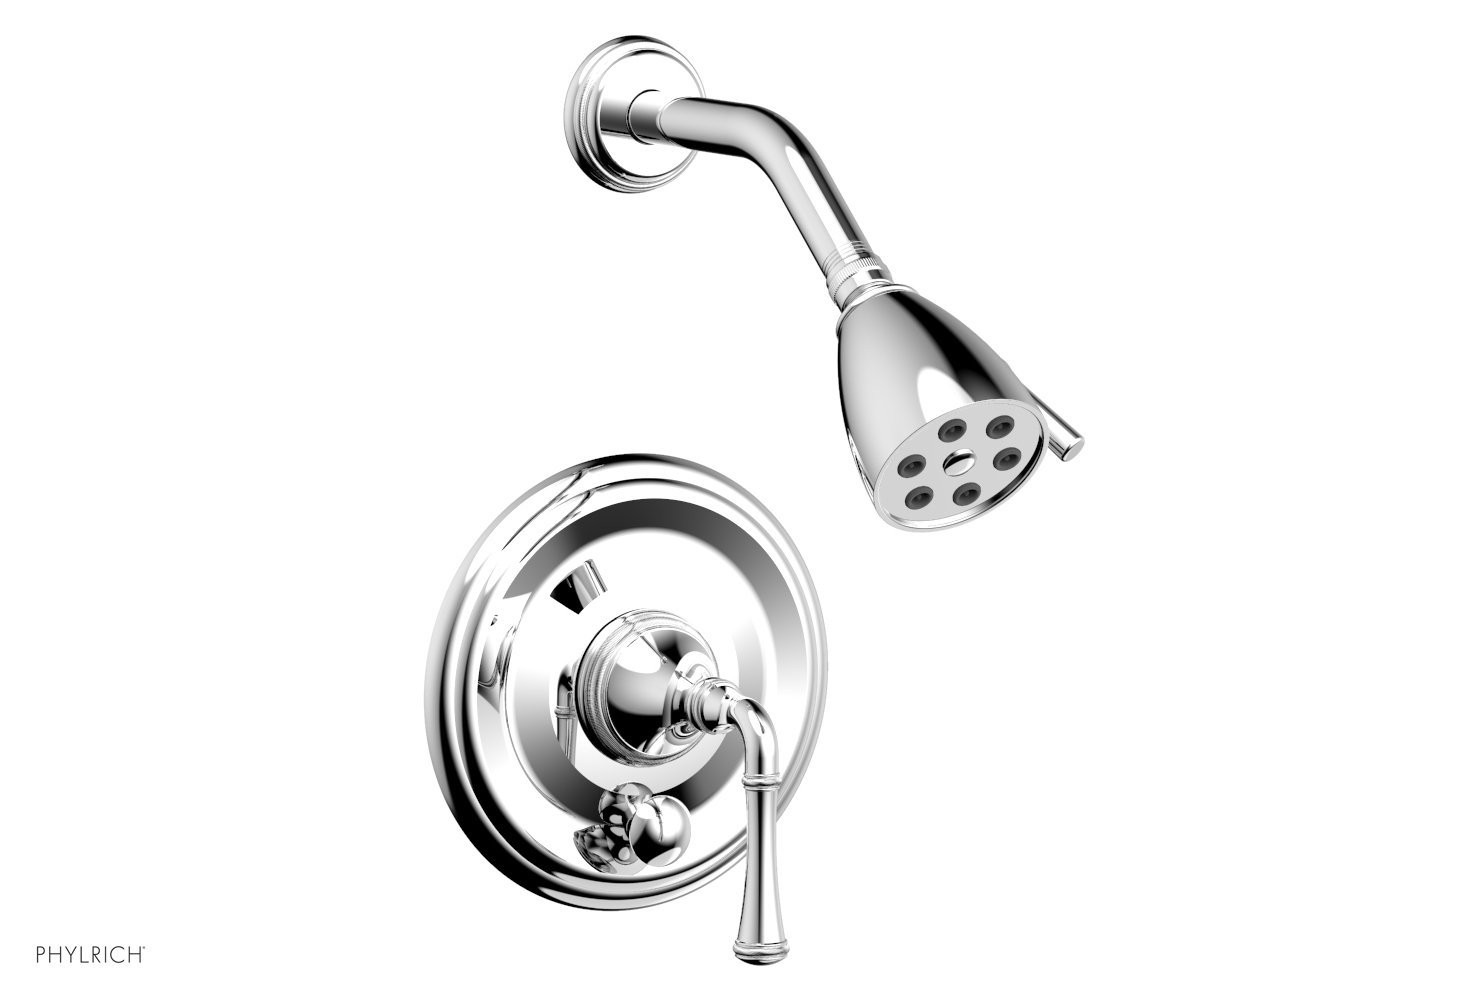 PHYLRICH 4-150 COINED WALL MOUNT PRESSURE BALANCE SHOWER AND DIVERTER SET WITH LEVER HANDLE